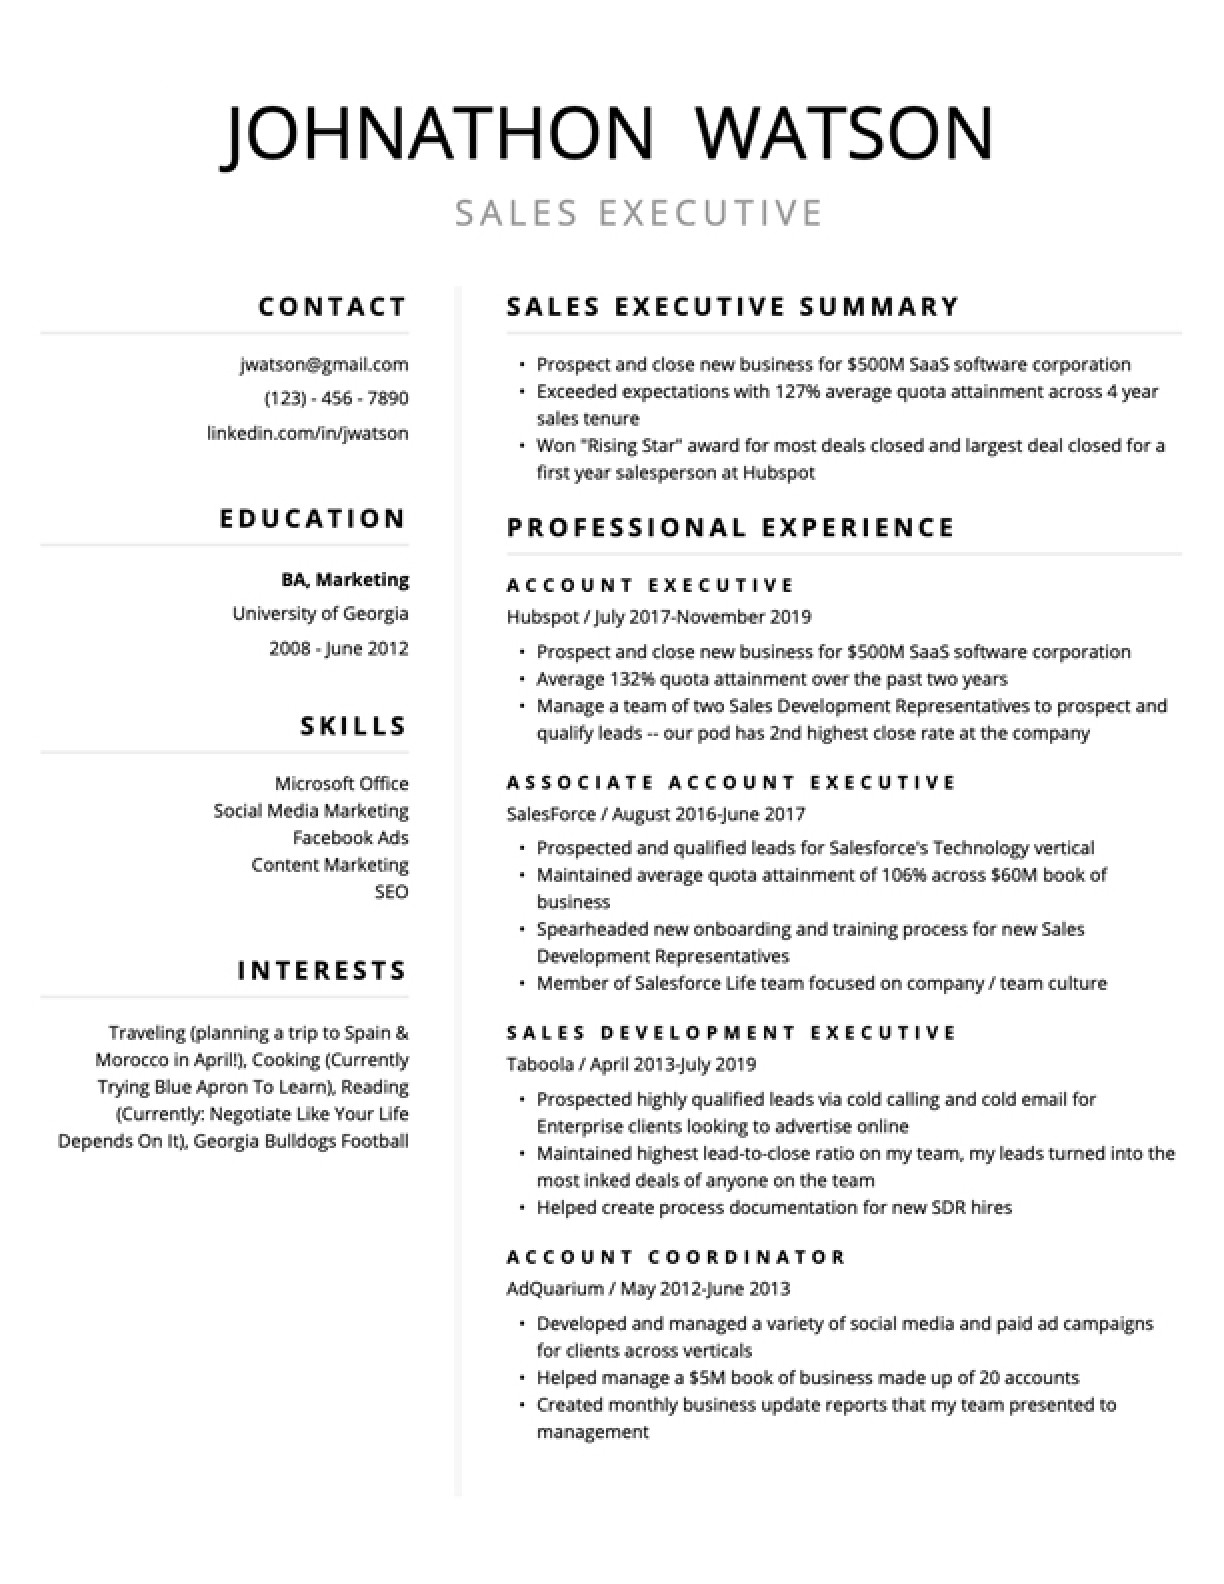 Sample Resumes for Low Income Jobs Free Resume Templates for 2022 (edit & Download) Resybuild.io